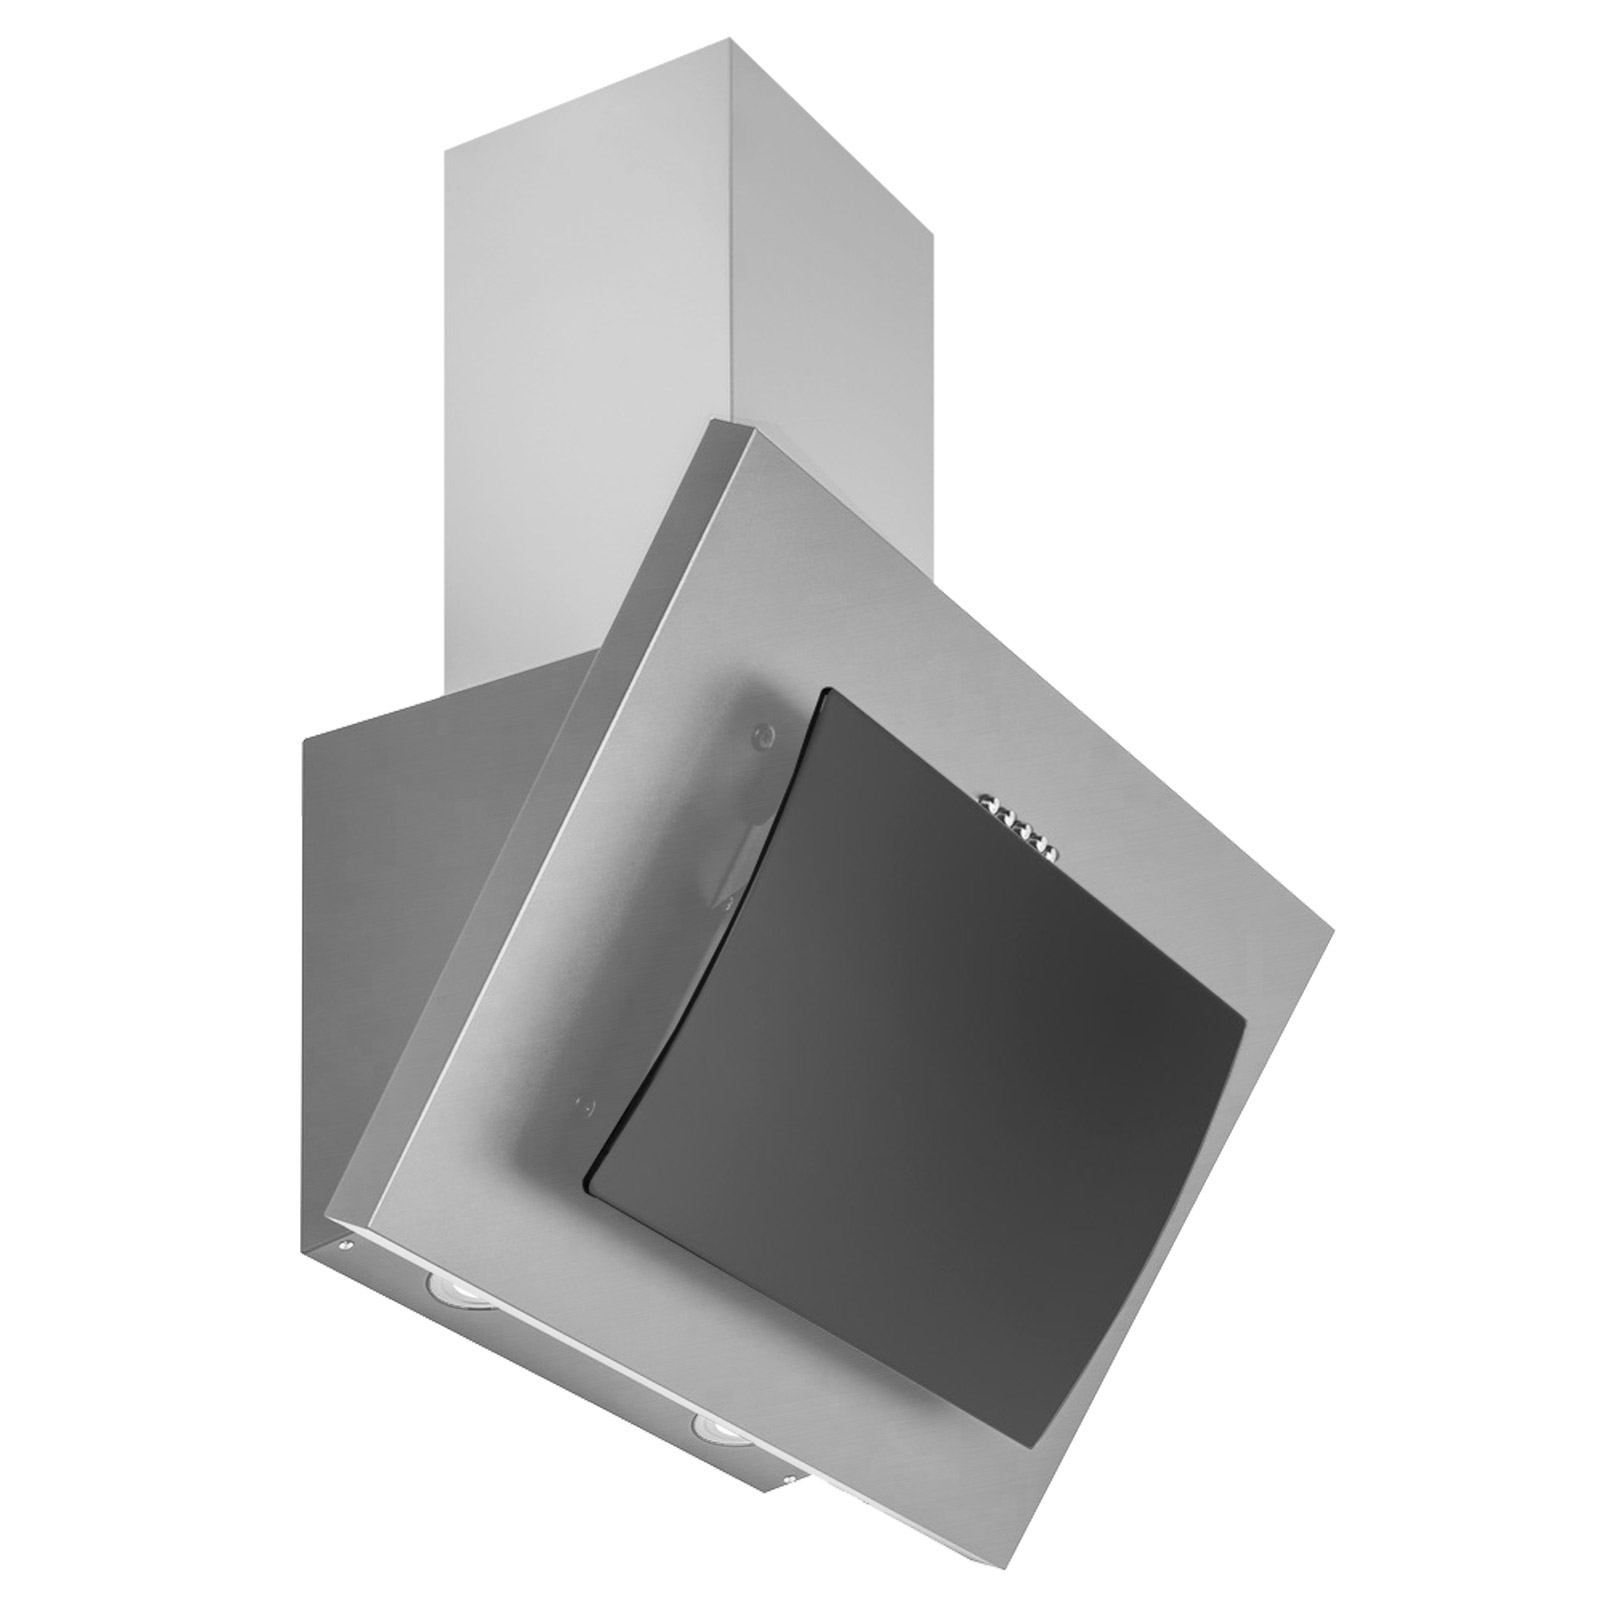 Image of Culina UBLCHH60 SS 60cm Angled Glass Chimney Hood Black Steel 3 Speed